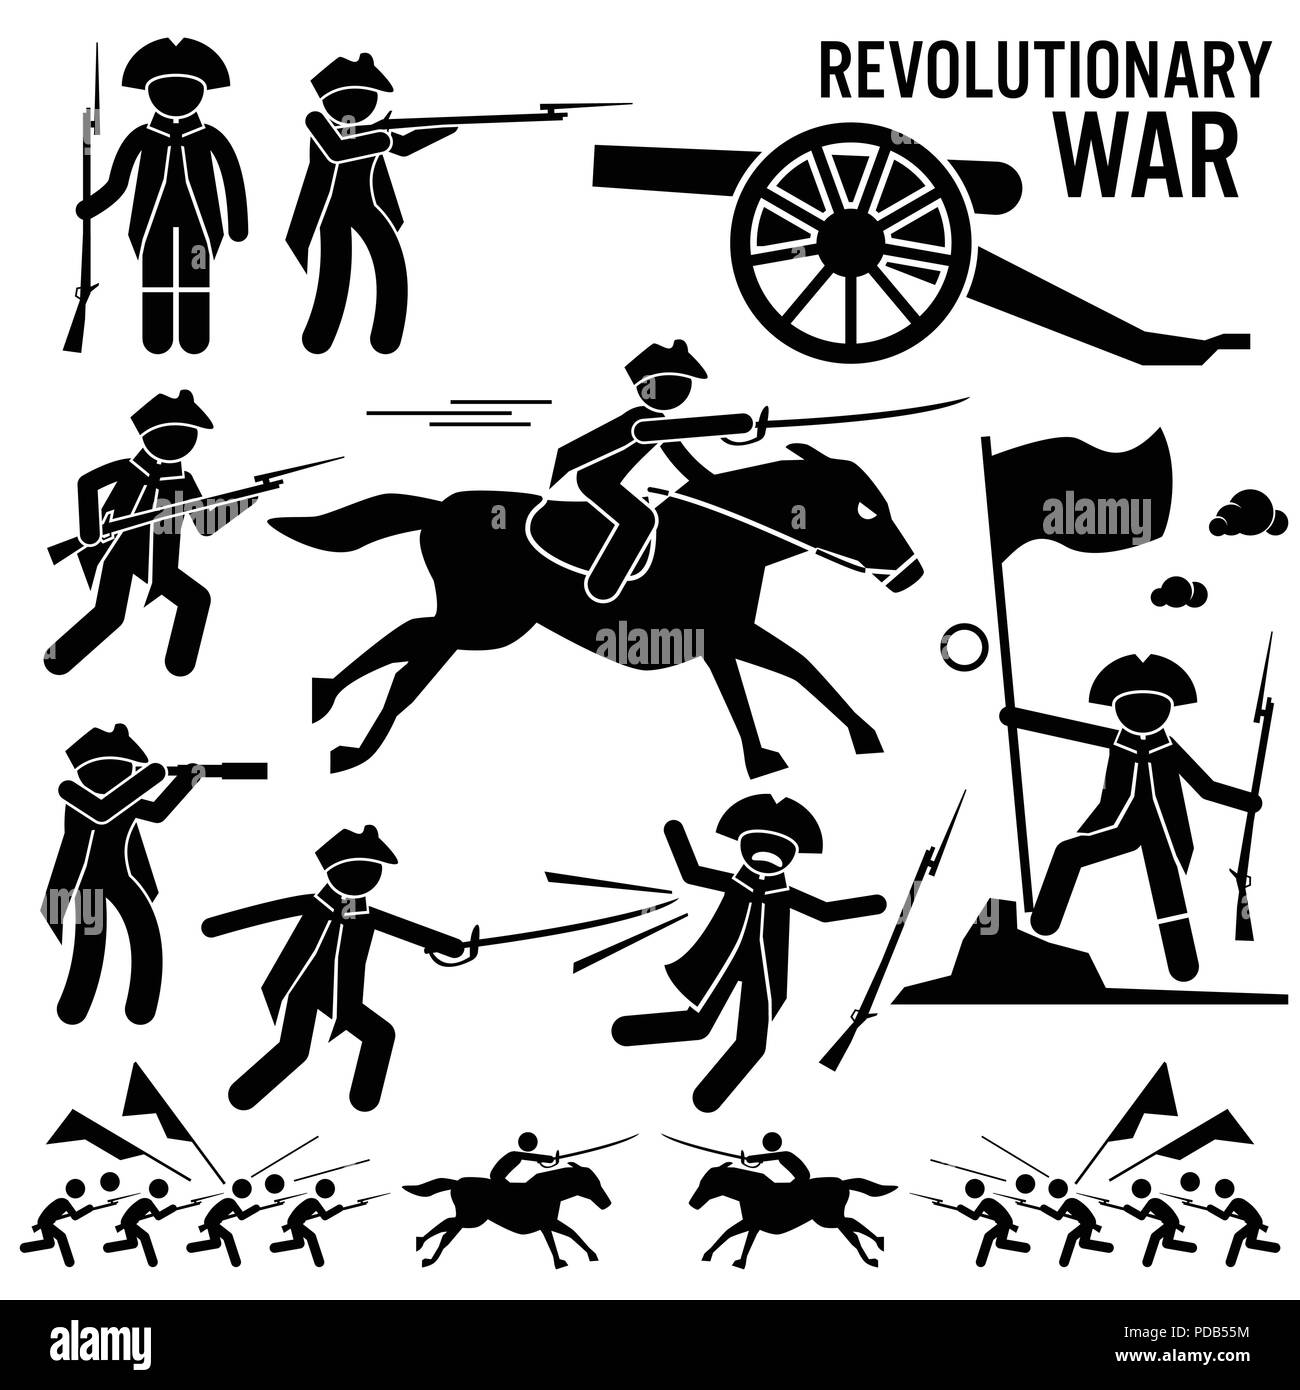 Revolutionary War Soldier Horse Gun Sword Fight Independence Day Patriotic Stick Figure Pictogram Icons Stock Vector